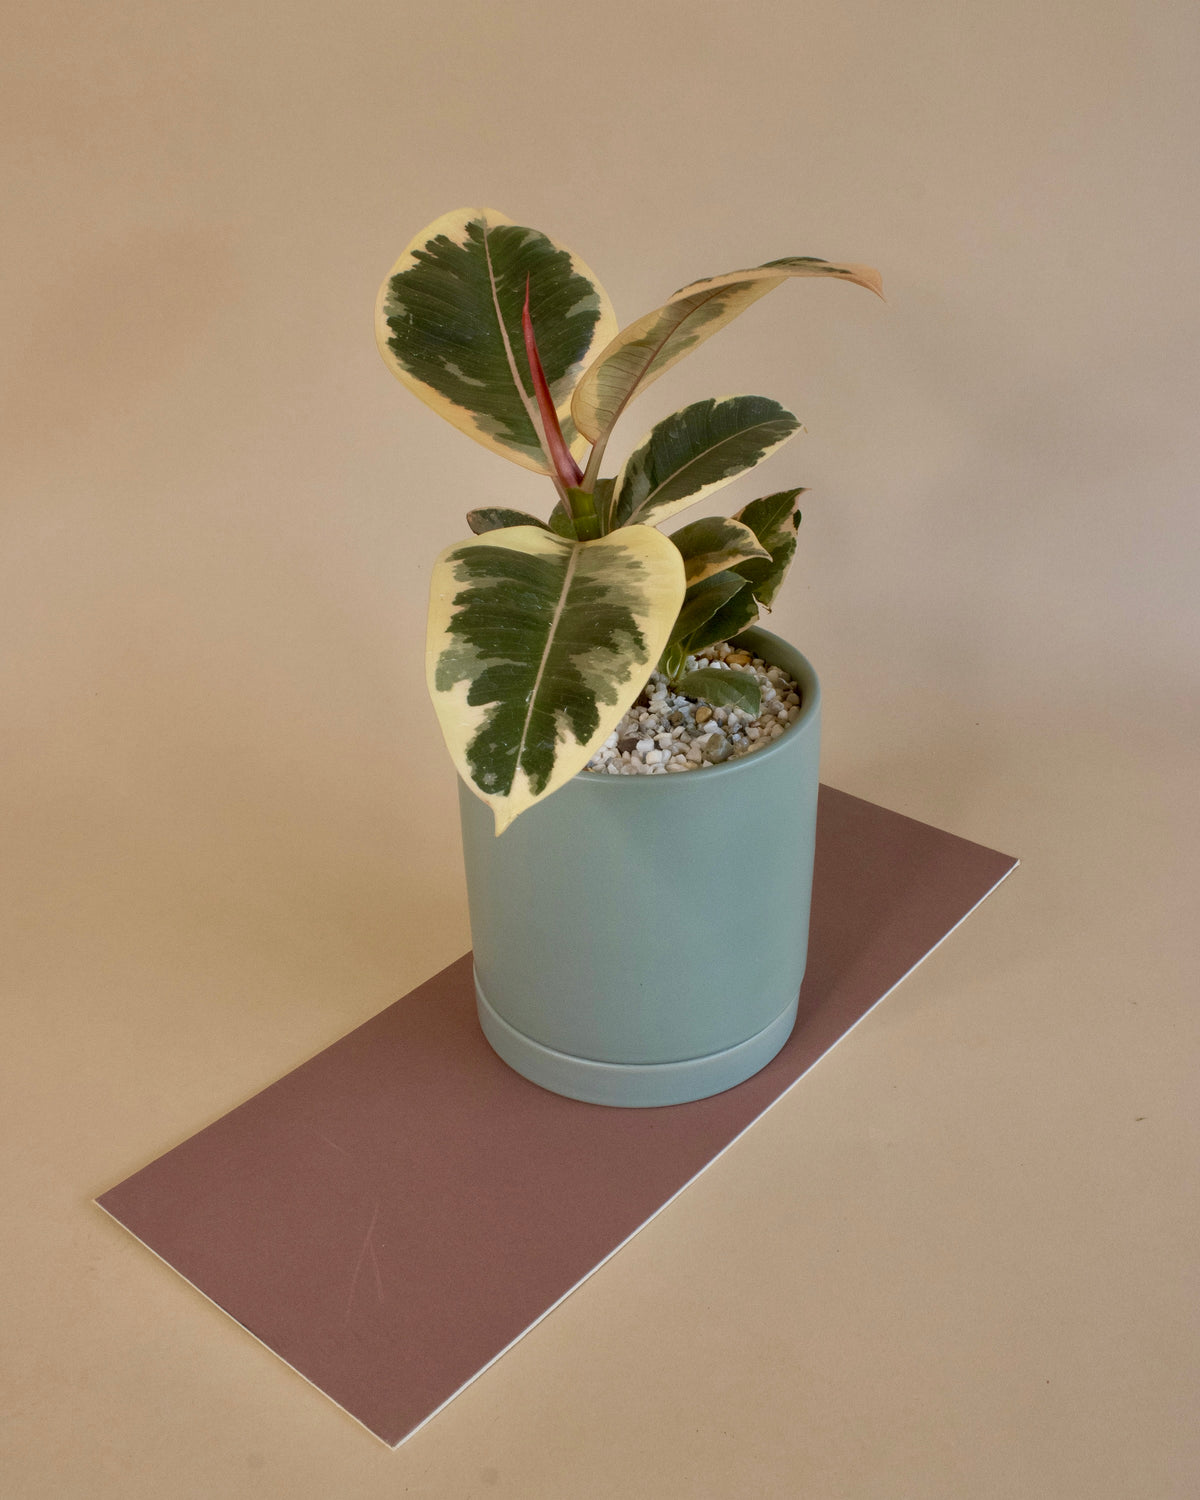 Lights Up A Room | Potted Plant Gift